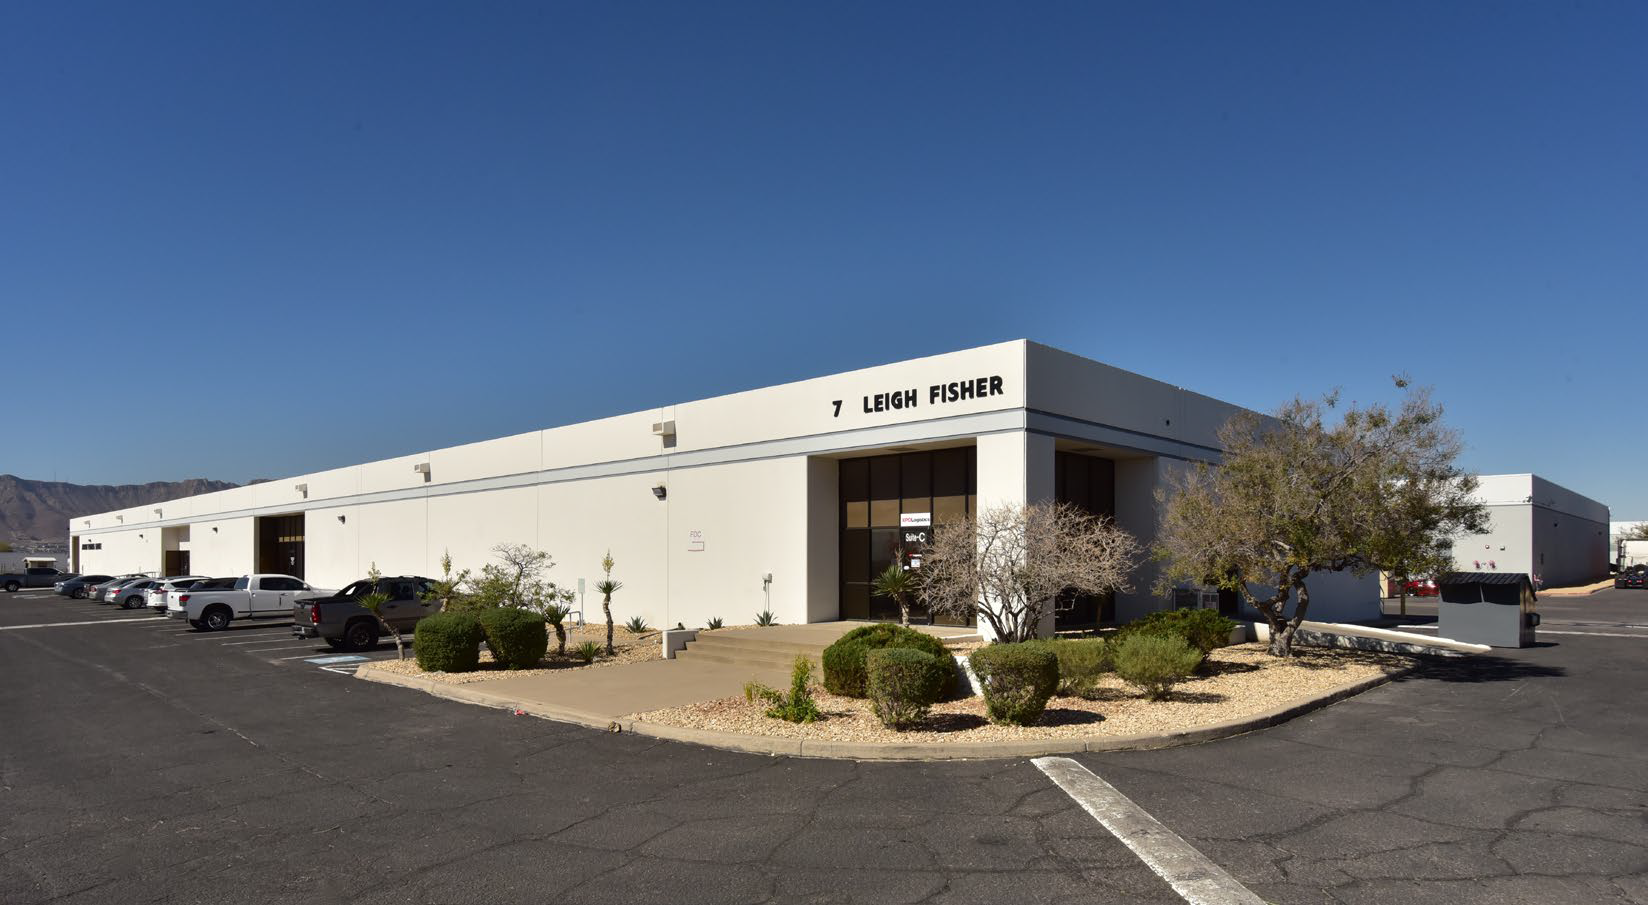 The Butterfield Trail submarket in which Sealy's buildings are located is one of the most noteworthy industrial areas in the El Paso market.